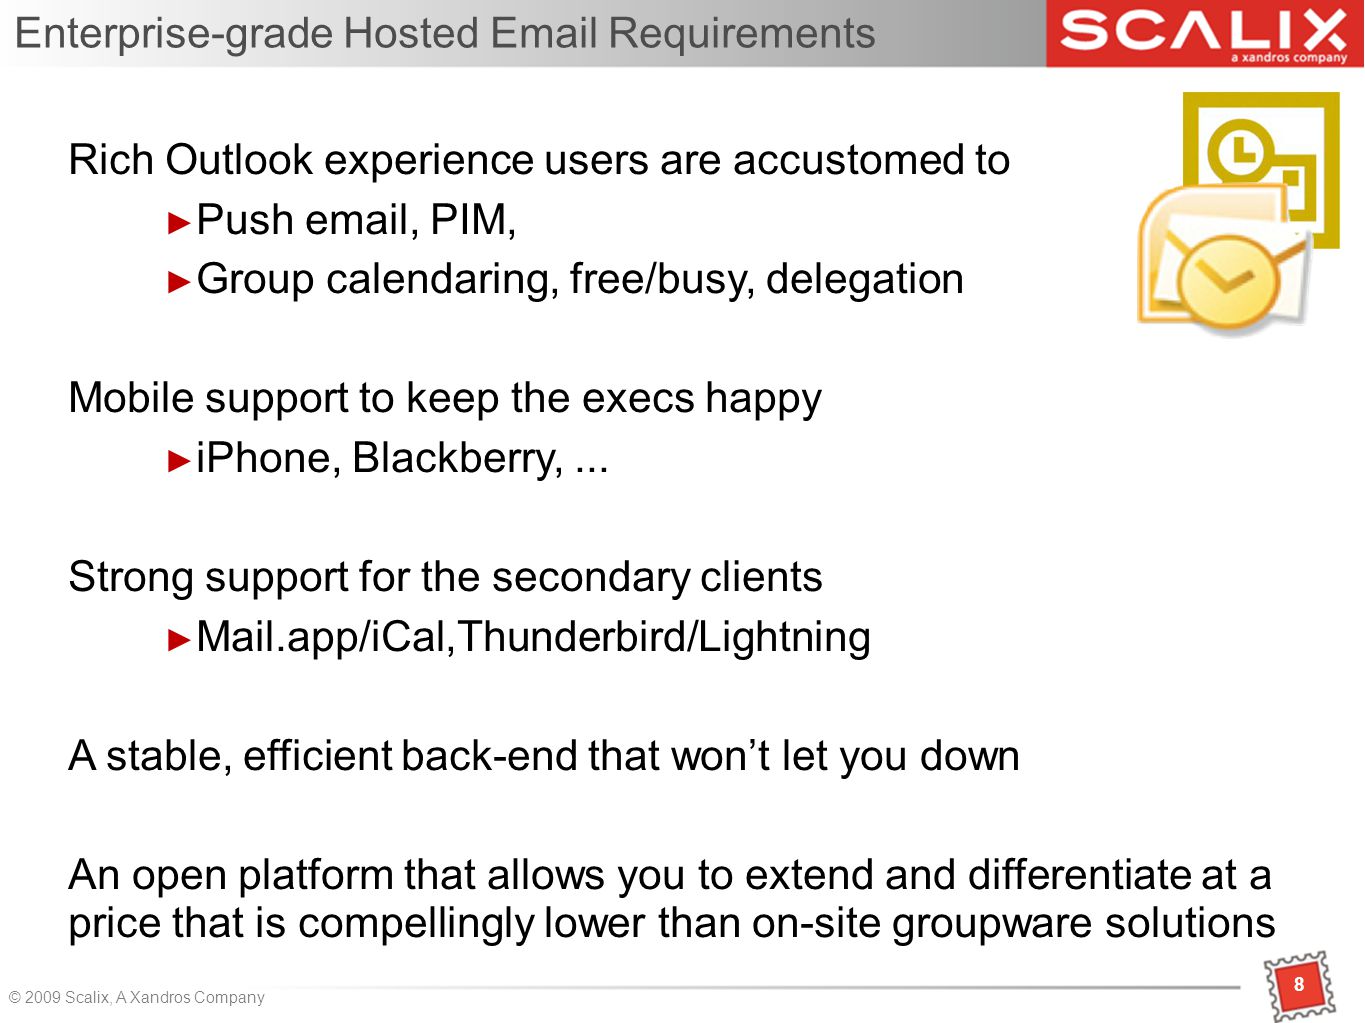 8 © 2009 Scalix, A Xandros Company Enterprise-grade Hosted  Requirements Rich Outlook experience users are accustomed to ► Push  , PIM, ► Group calendaring, free/busy, delegation Mobile support to keep the execs happy ► iPhone, Blackberry,...